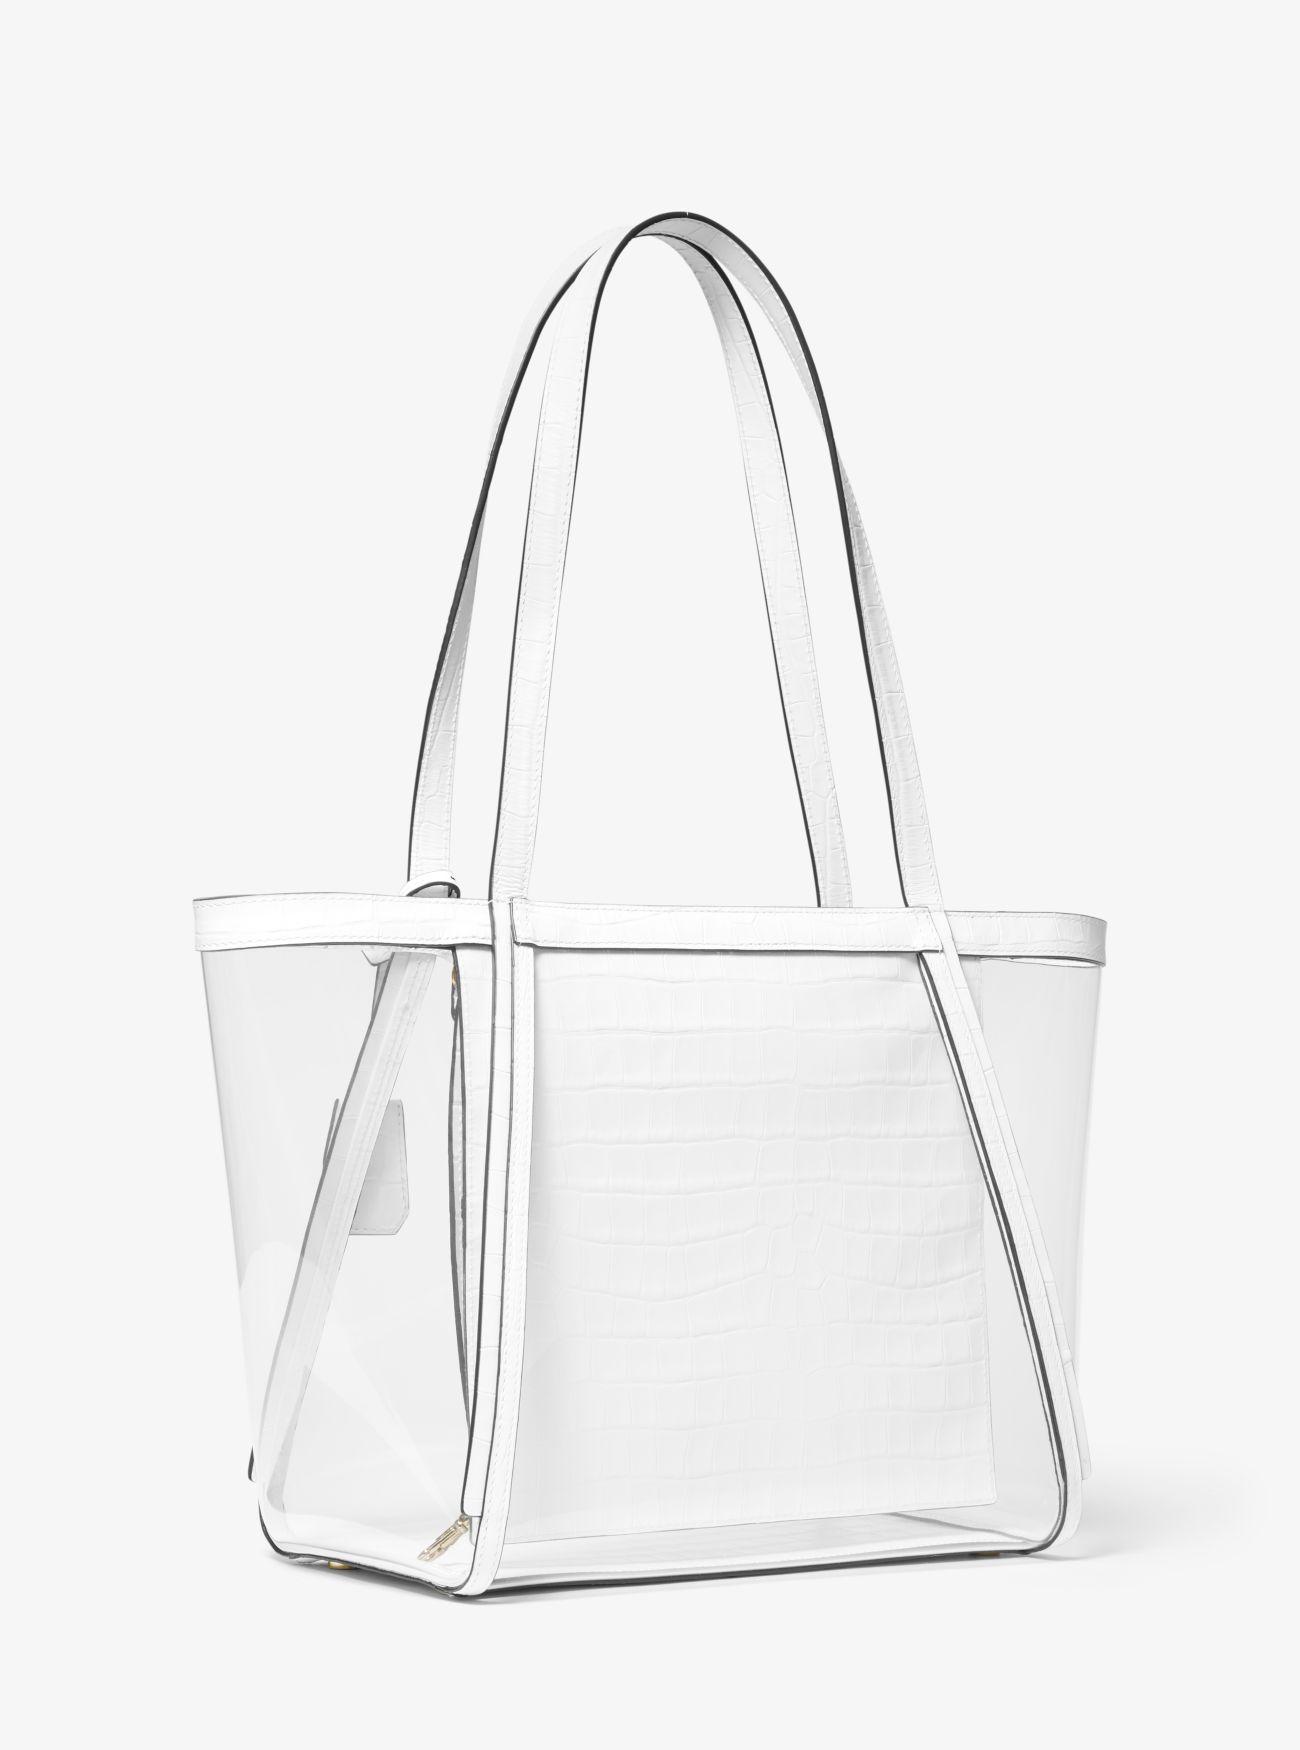 MICHAEL Michael Kors Whitney Large Clear And Leather Tote Bag in White - Lyst